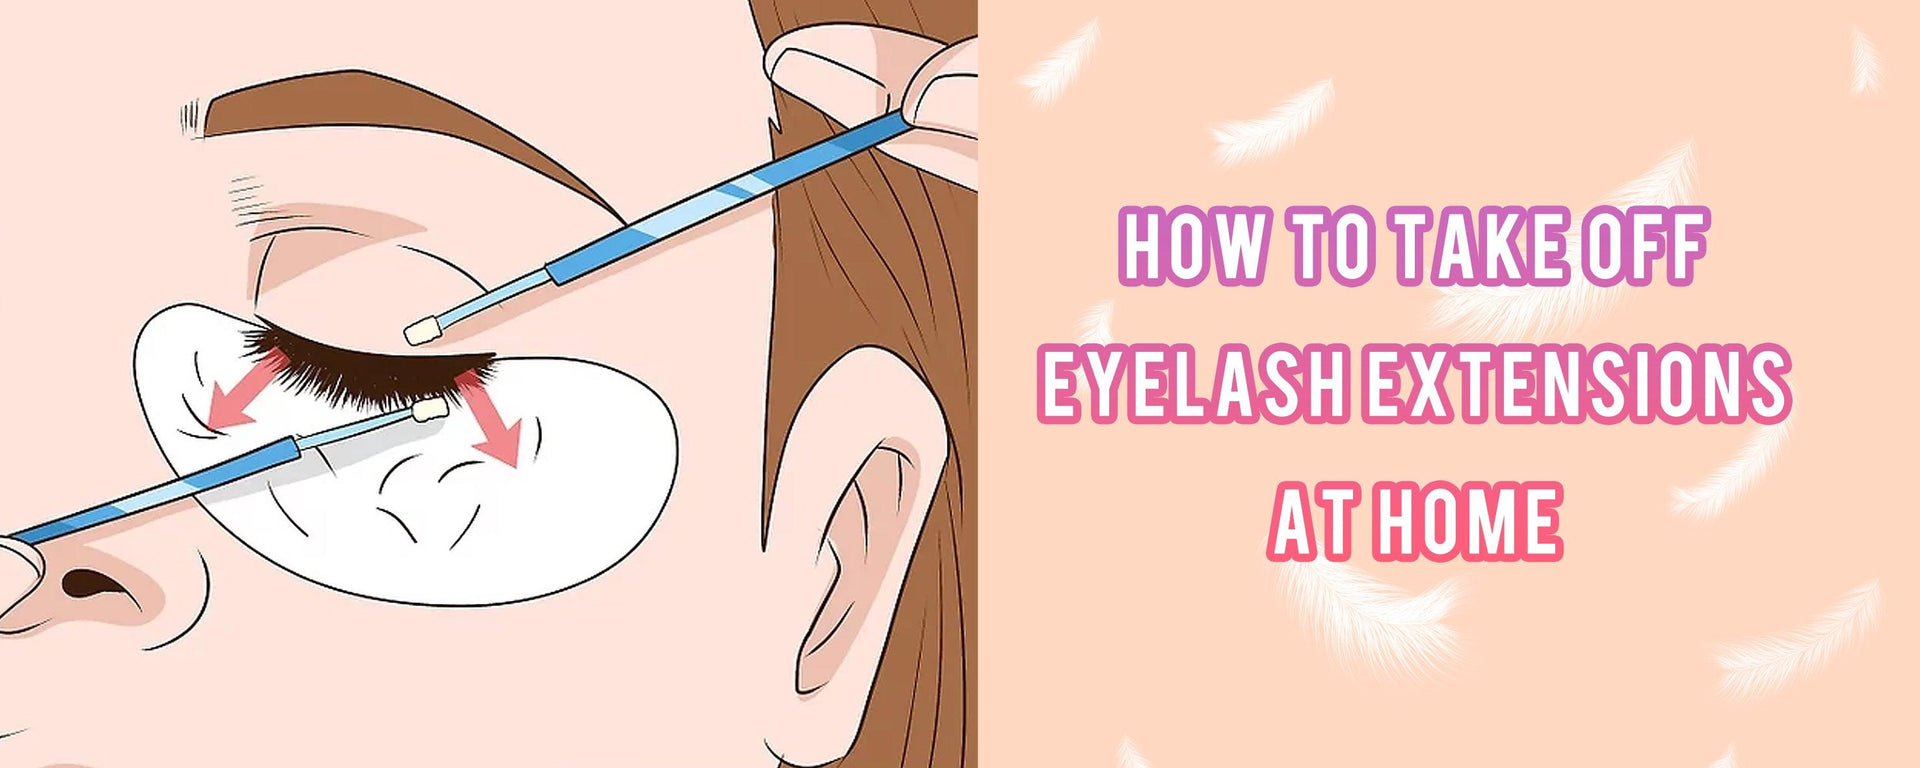 How to Remove Eyelash Extensions at Home Safely - VAVALASH